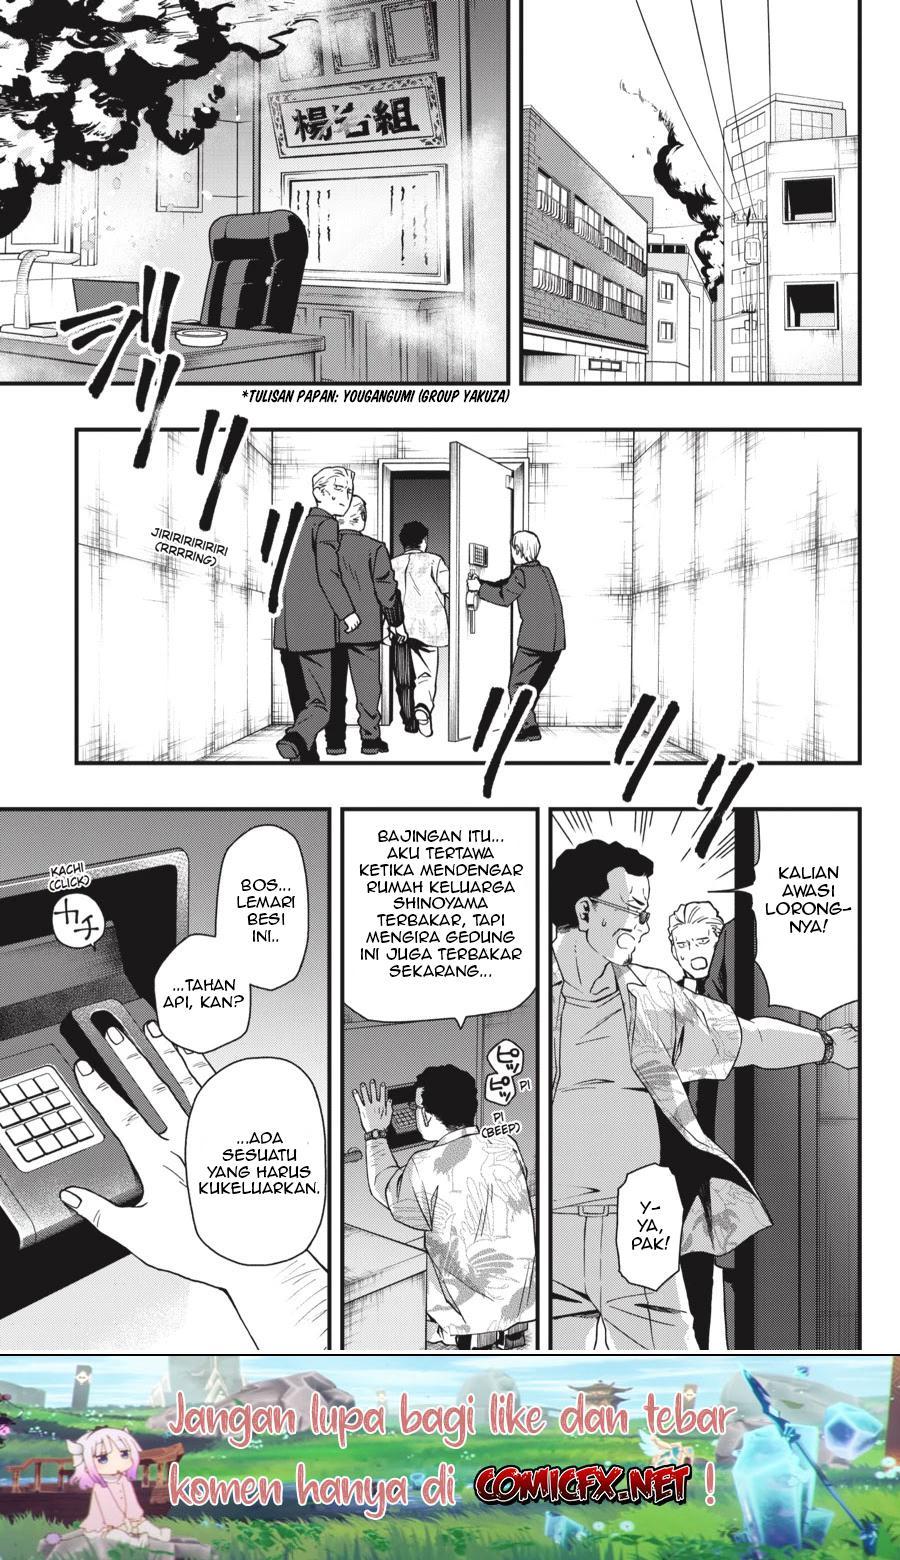 Dead Mount Death Play Chapter 23 Bahasa Indonesia